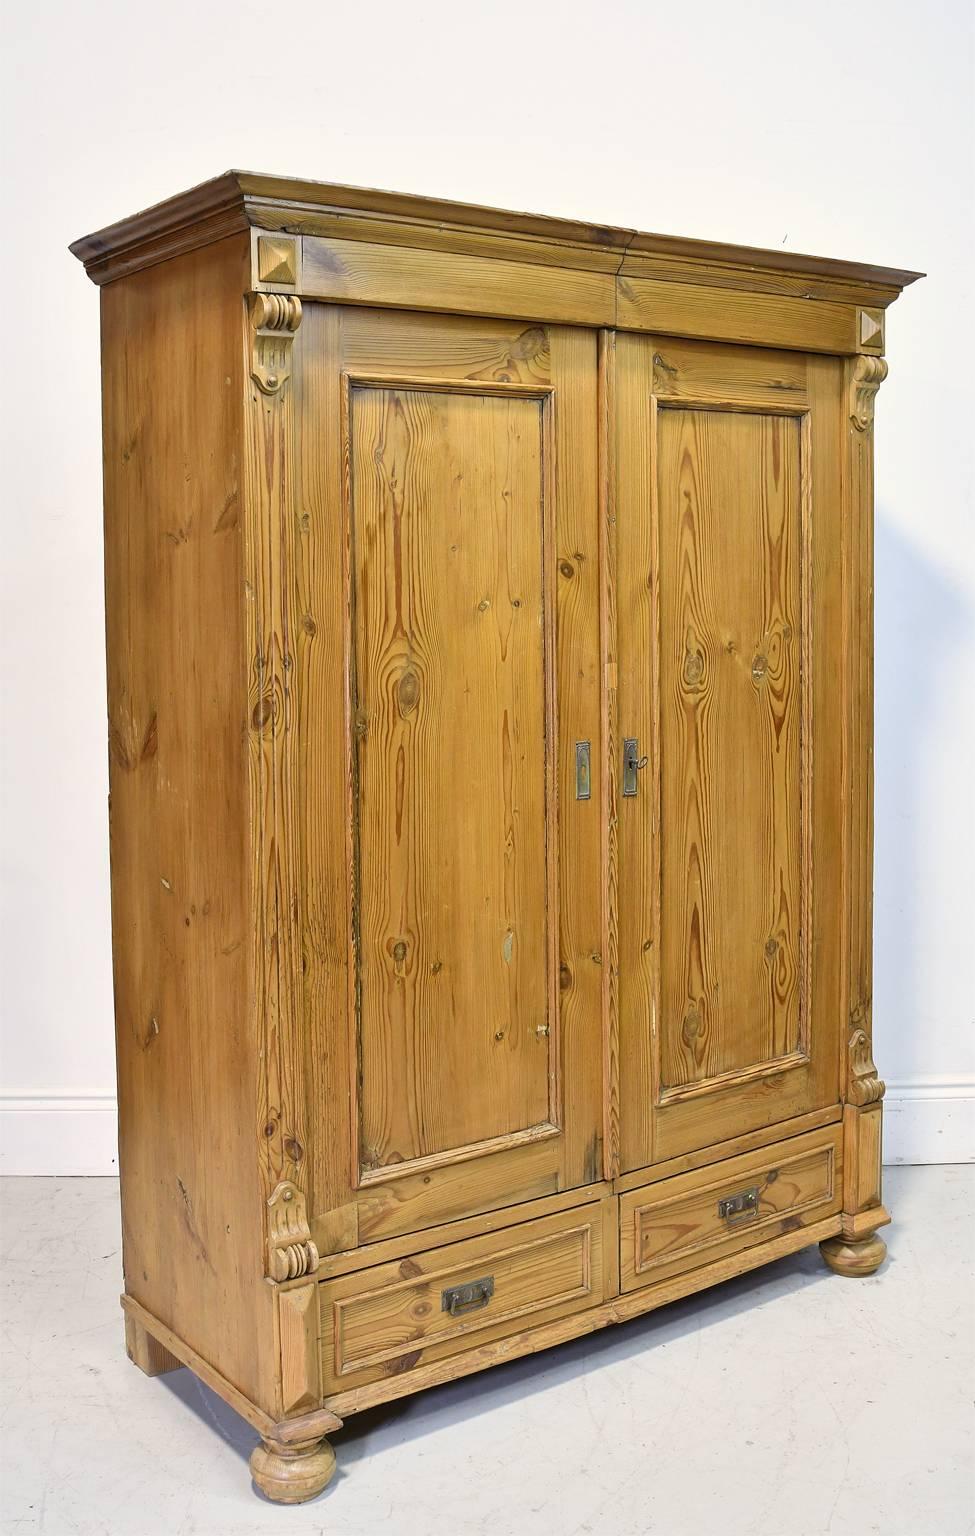 A handsome light, caramel-colored pine armoire with two doors with molding around the recessed panels that open on inside hinges to three fixed, interior shelves, with two exterior drawers on the base that rests on bun feet. Carved wooden appliqués